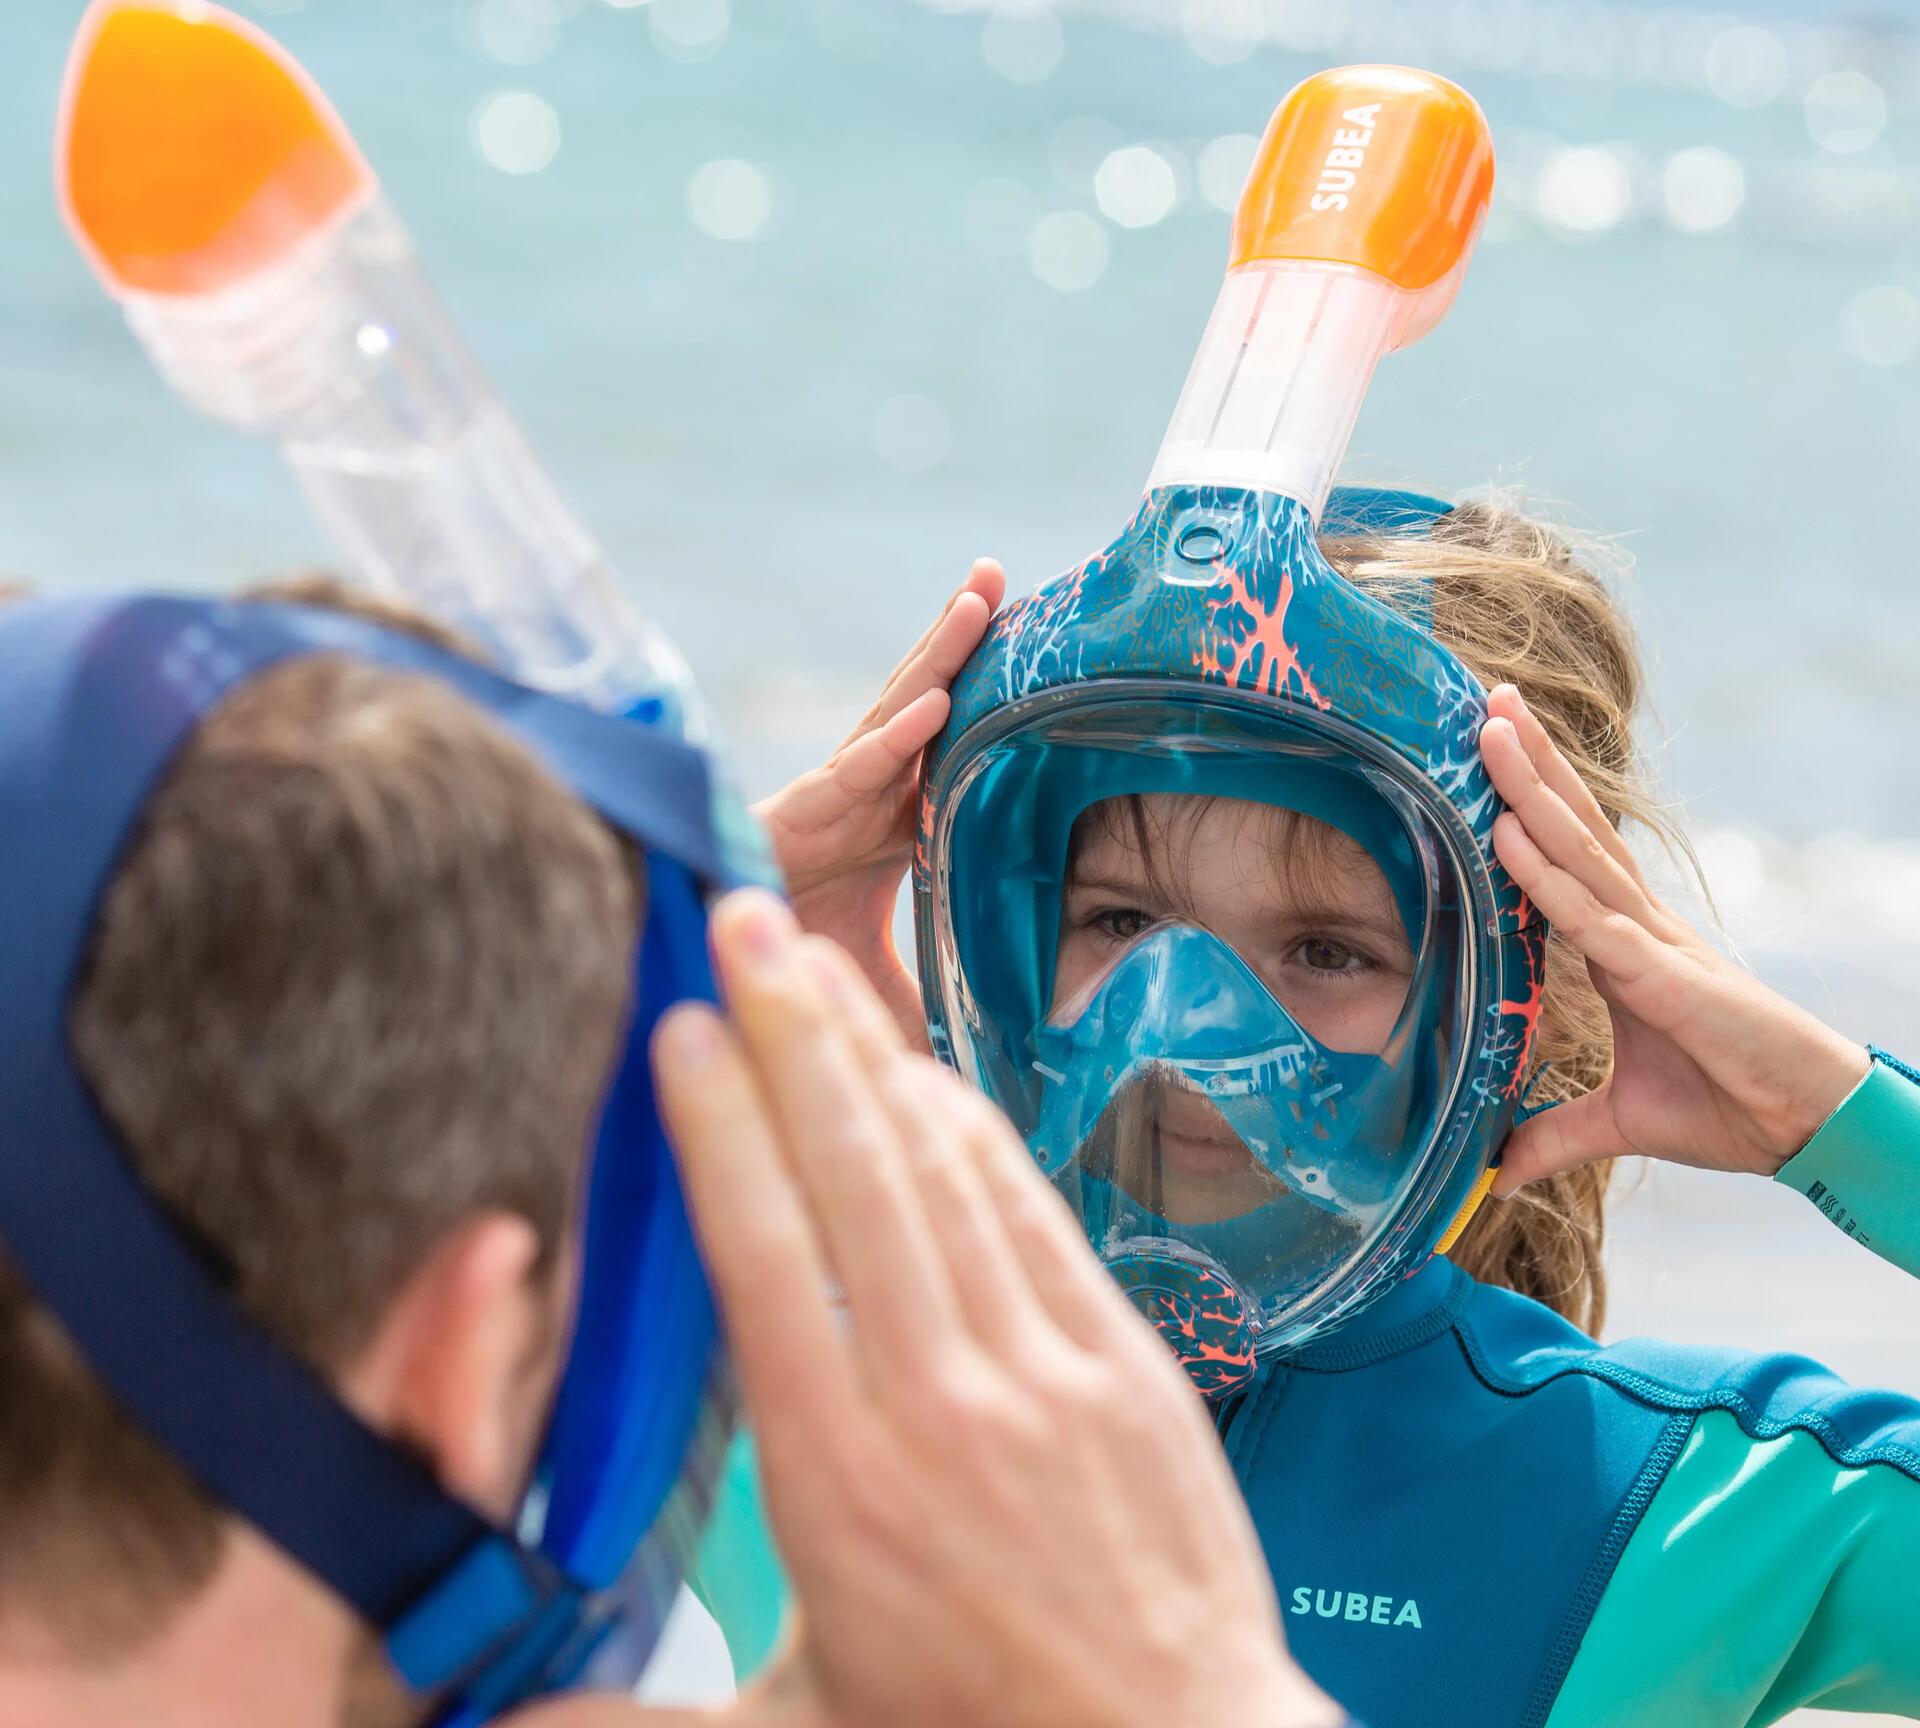 A man and woman adjusting their snorkeling masks